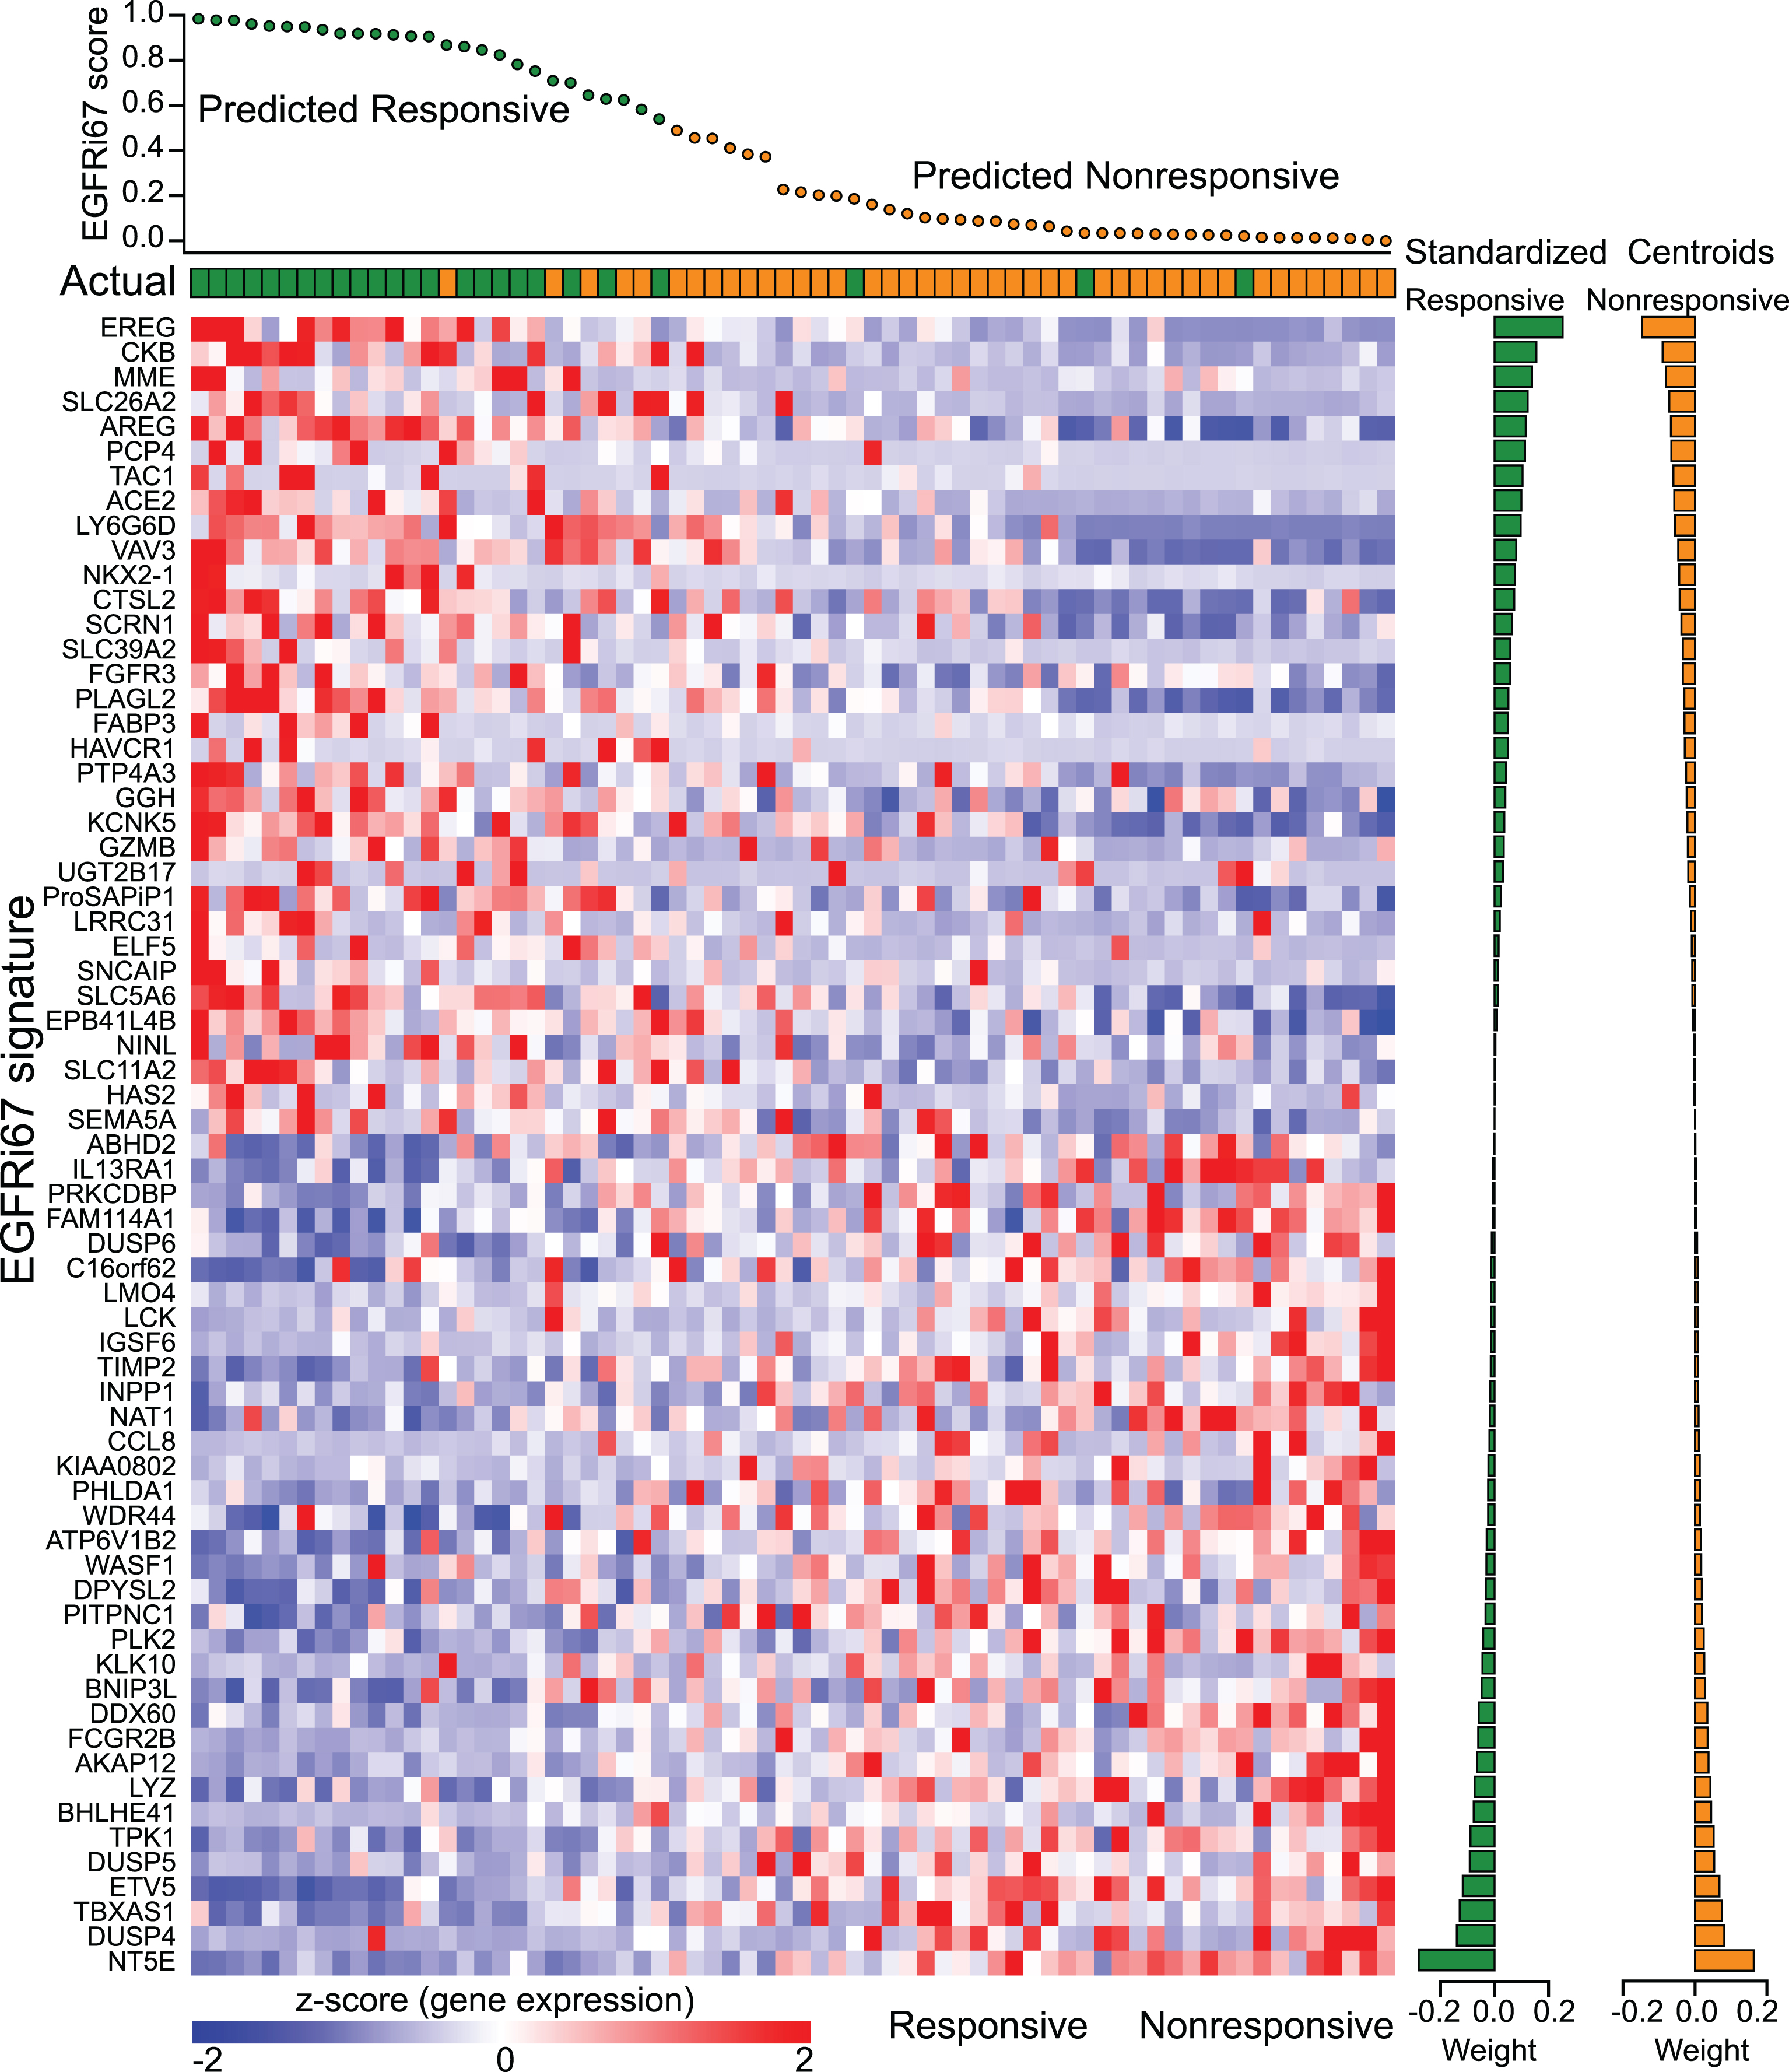 Stratification of colorectal cancer using the EGFRi67 gene signature. The EGFRi67 signature classified 68 colorectal tumors by their response to cetuximab [32]. Predicted and actual responses are shown at the top. The gene expression data, shown at the bottom, was Z-score transformed. The gene weights (shrunken class centroids) are shown at the right.